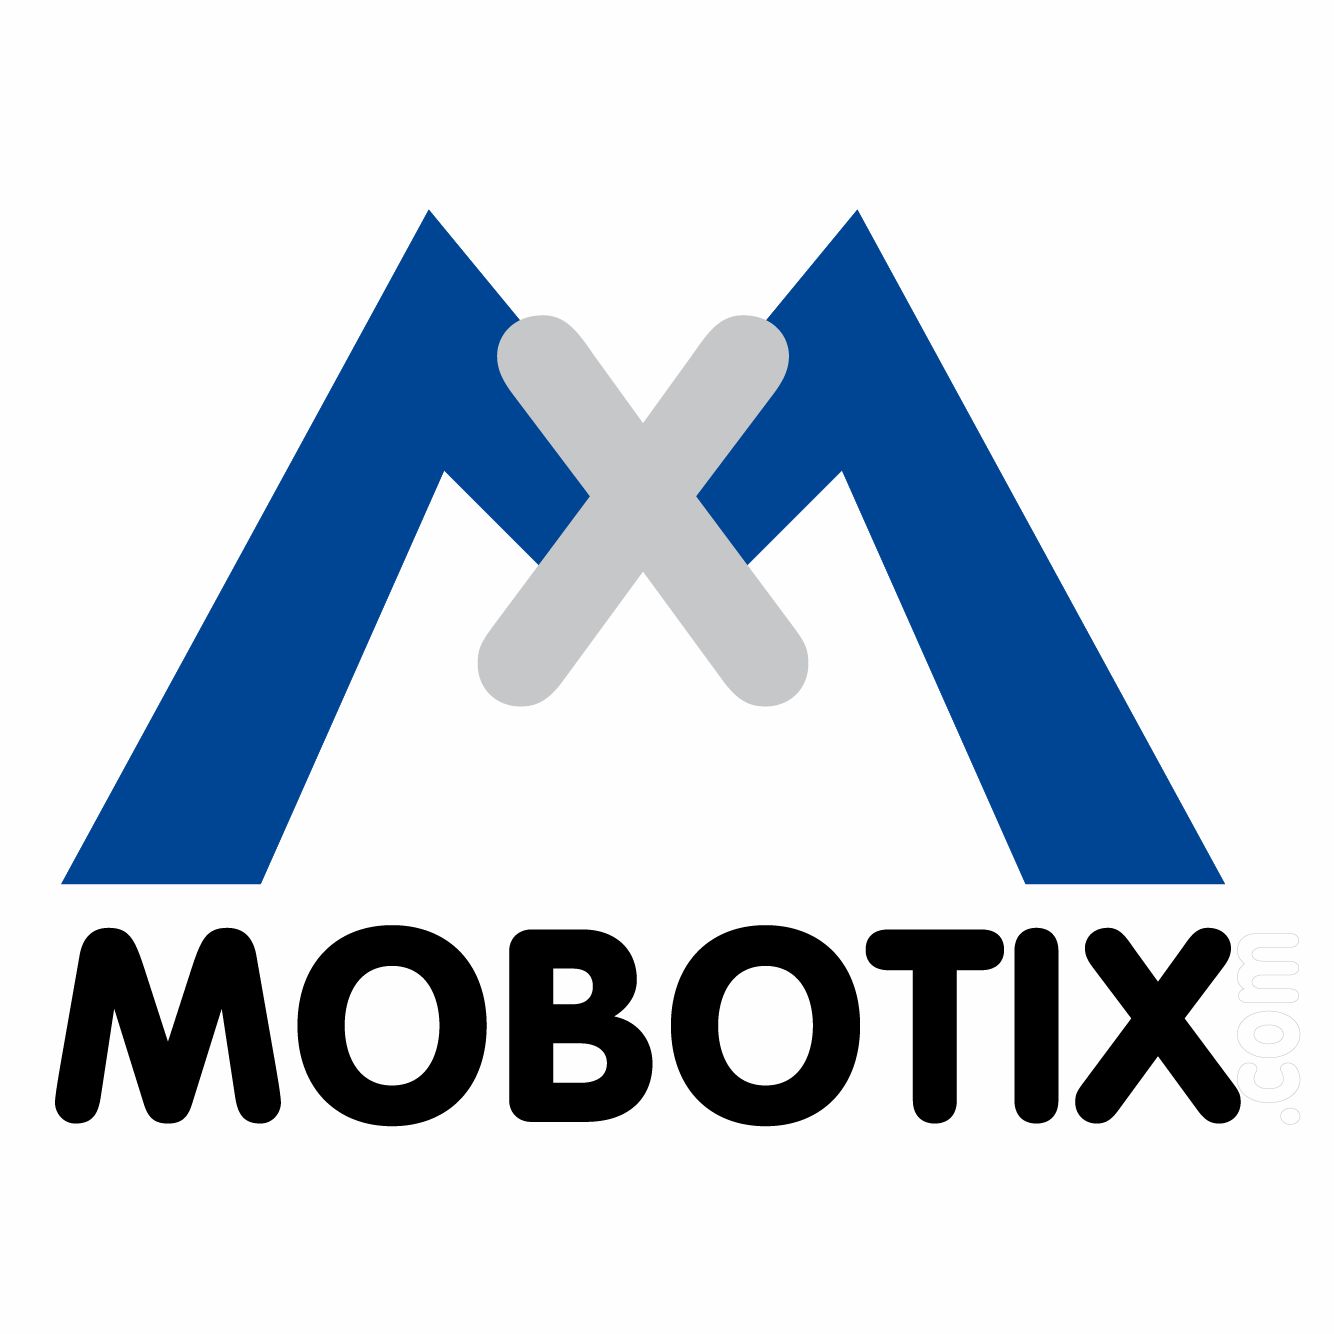 https://securetech.ae/wp-content/uploads/2019/02/22.MOBOTIX.png